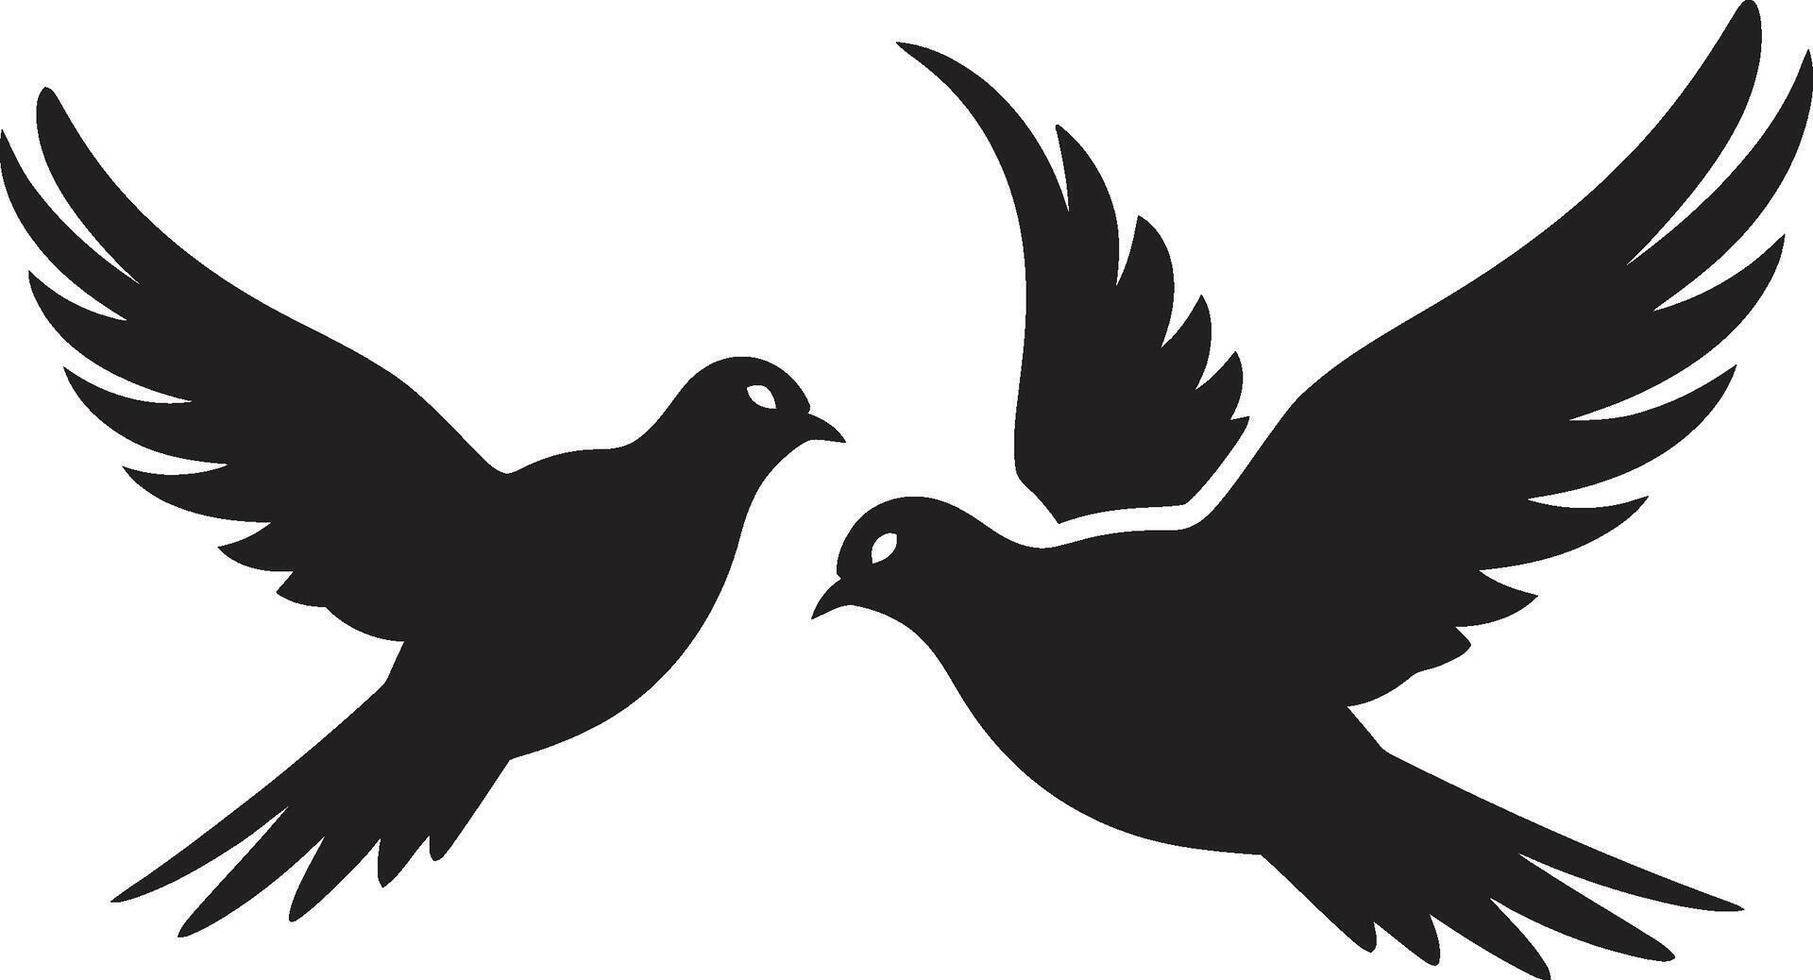 Symbolic Serenity Dove Pair Element Pair of Peace Emblem of a Dove Pair vector